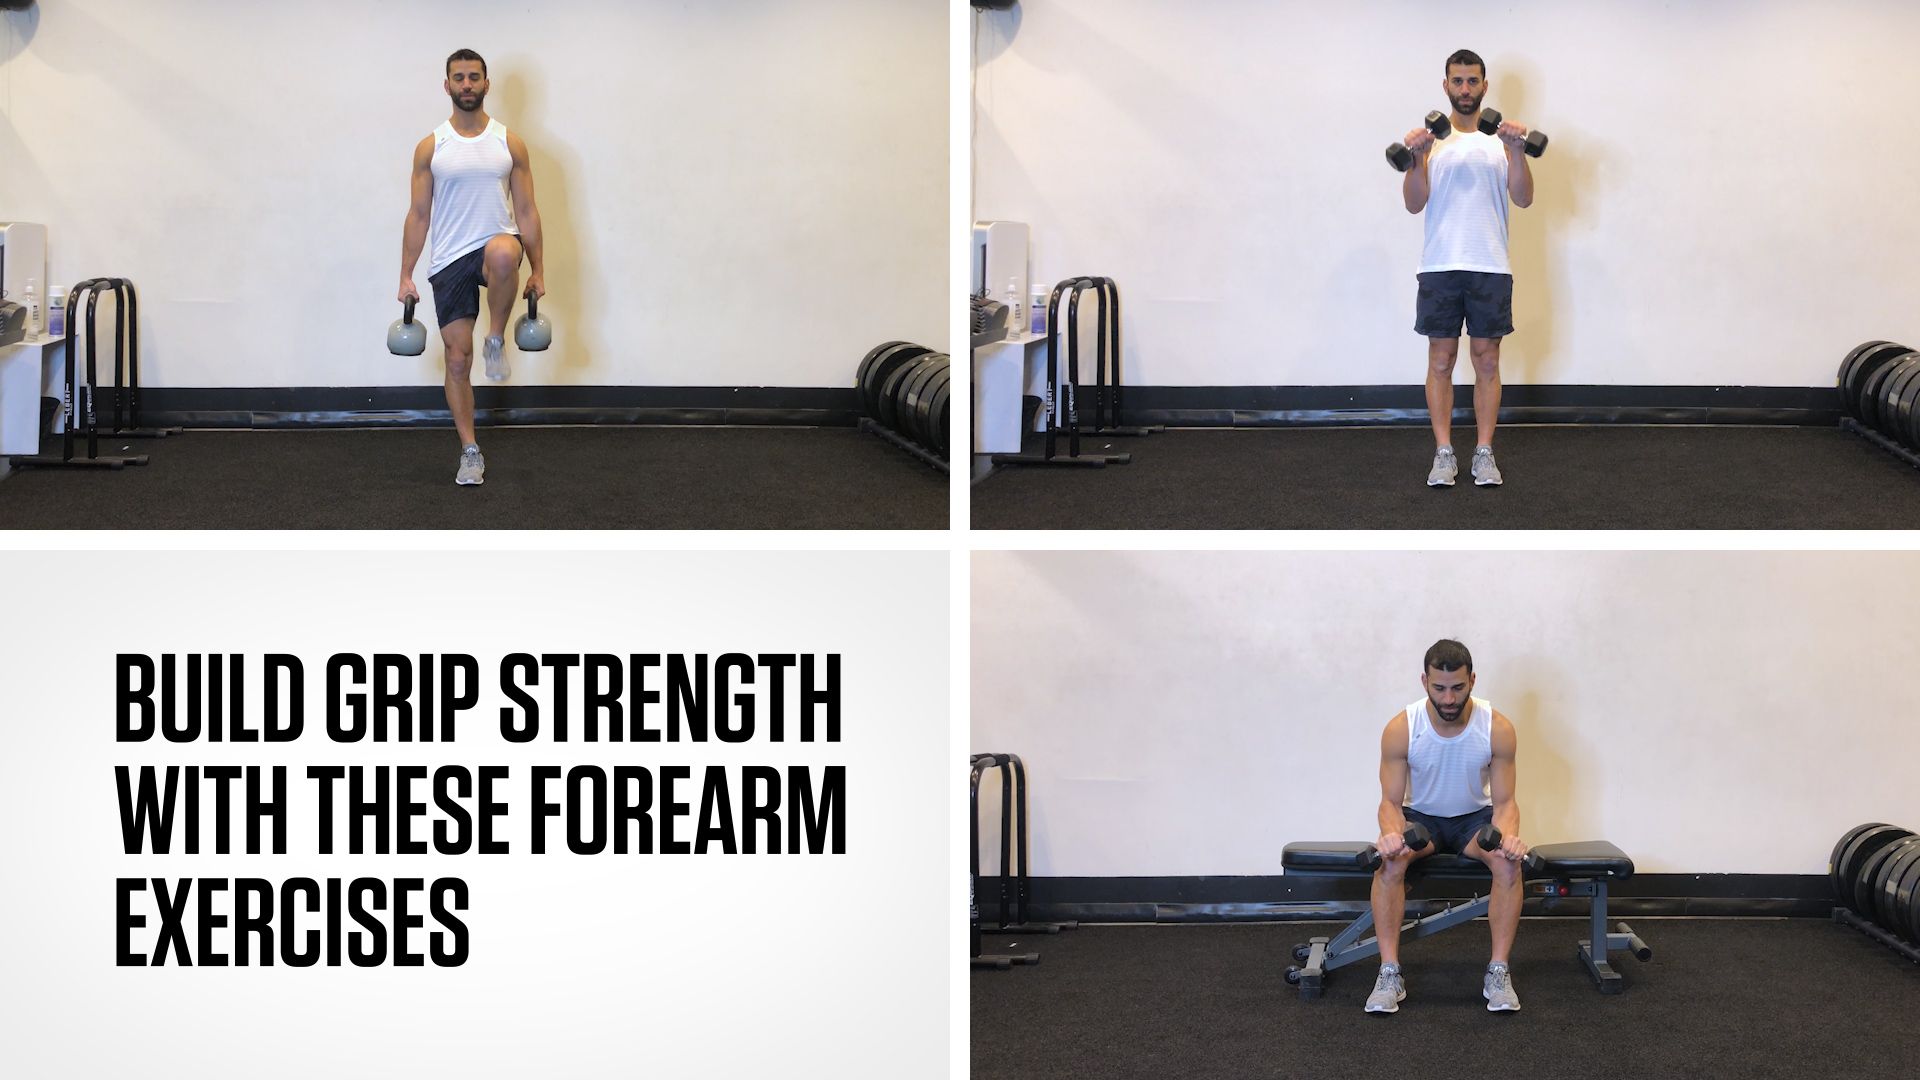 isometric exercises for forearms